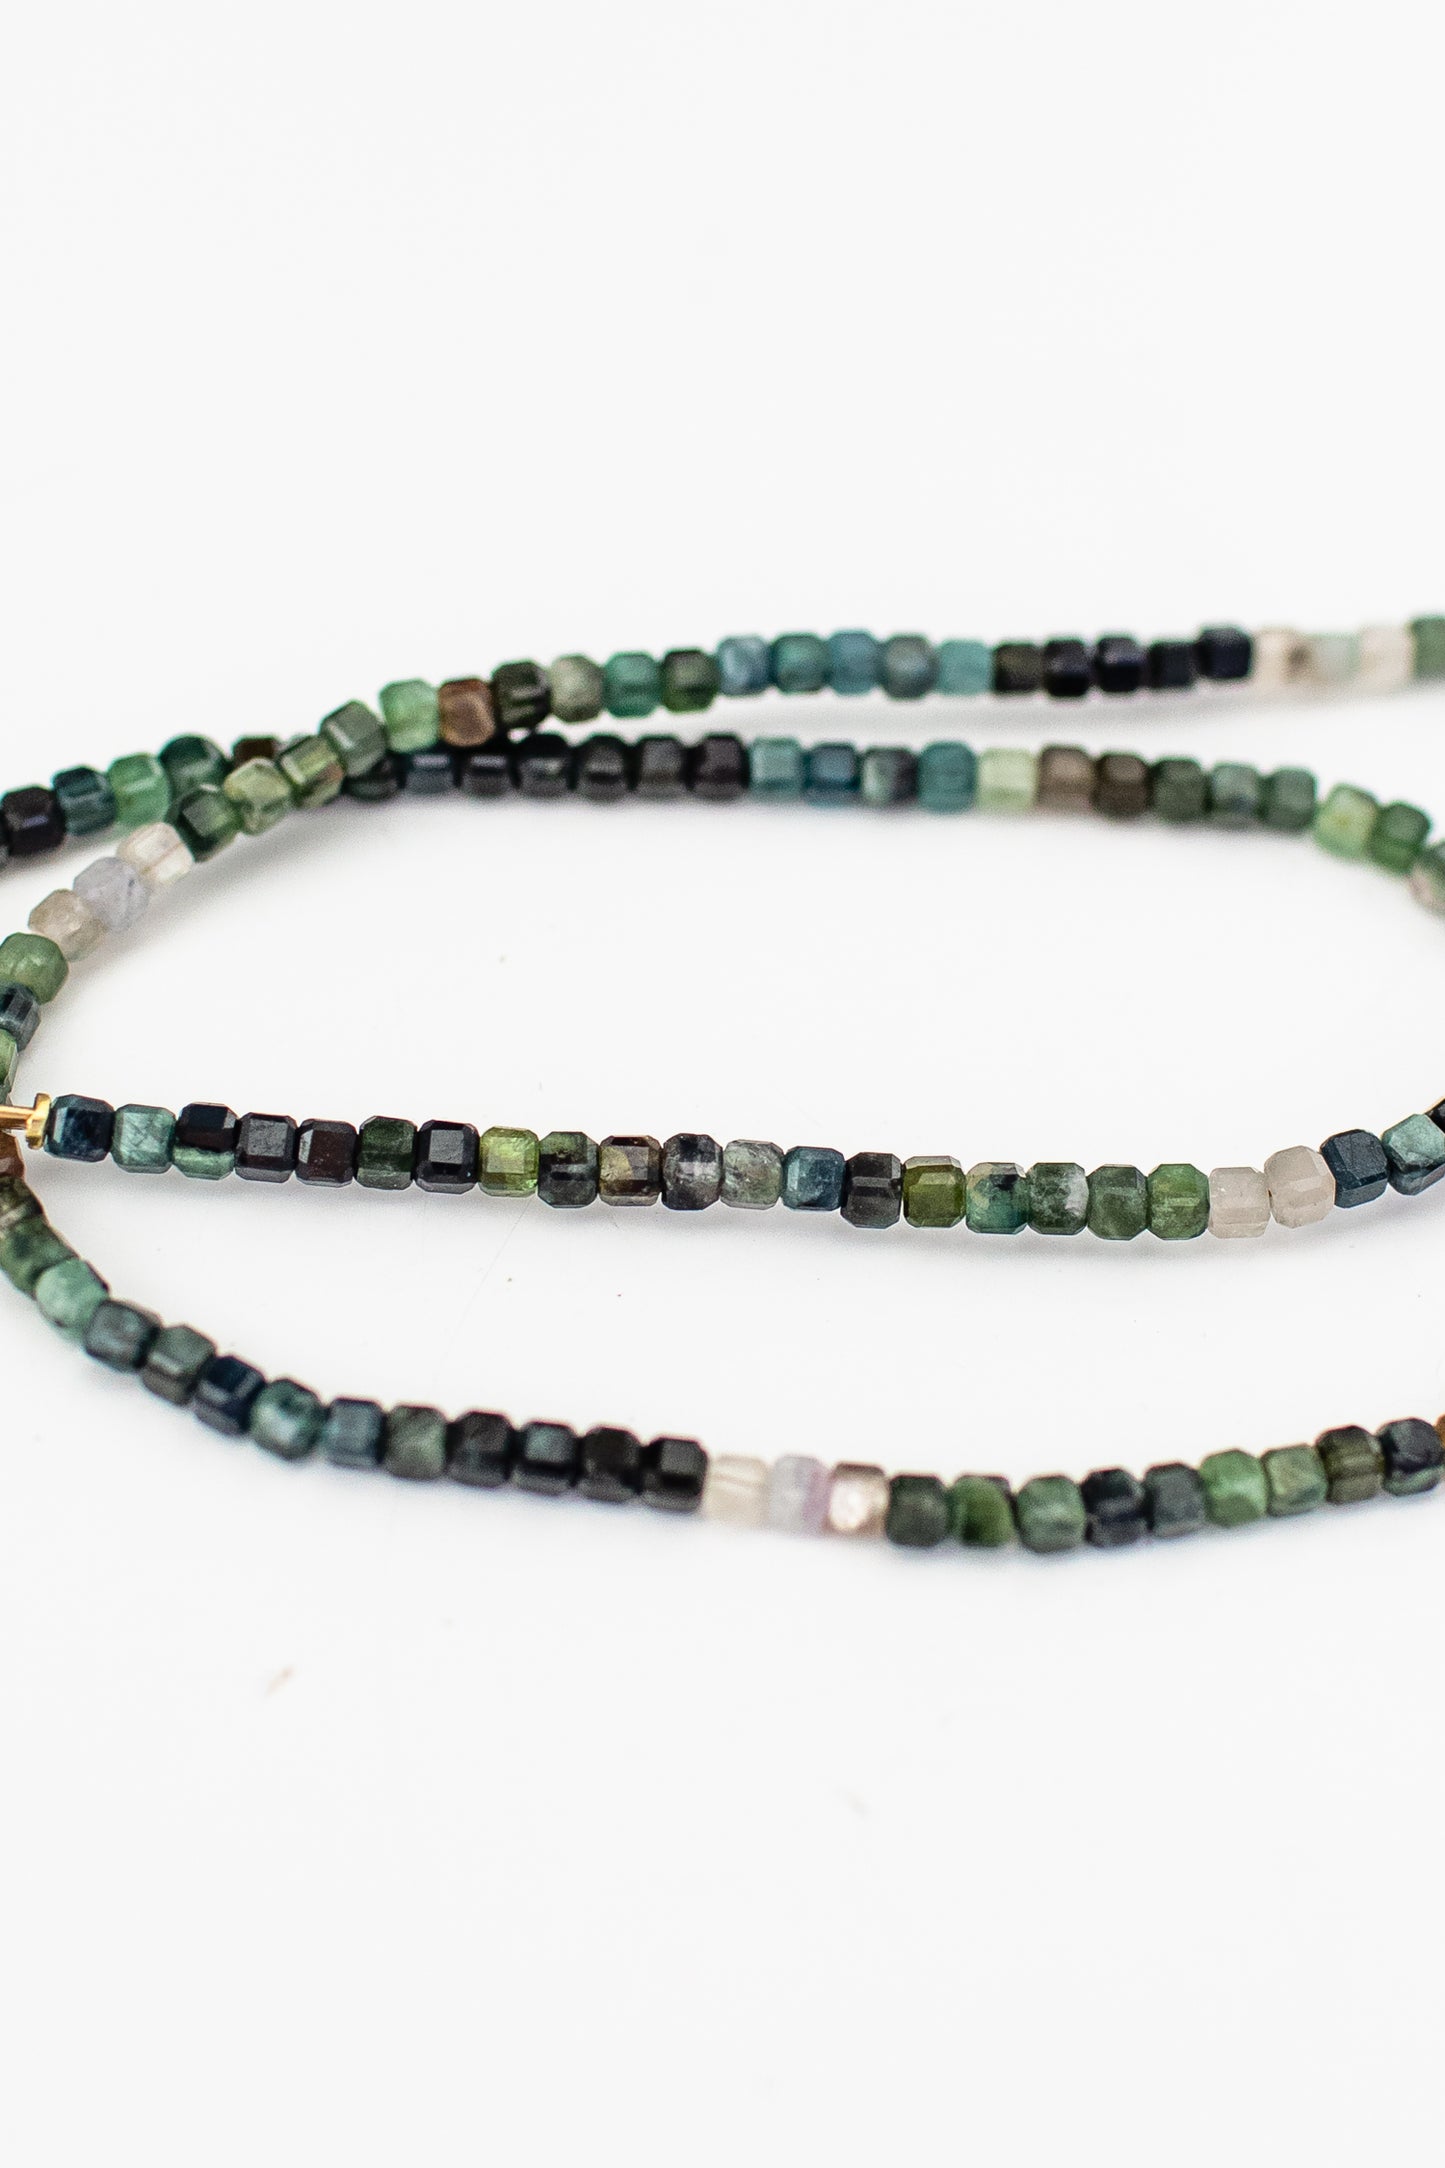 Mens + Womens Polished Tourmaline Necklace in shades of green